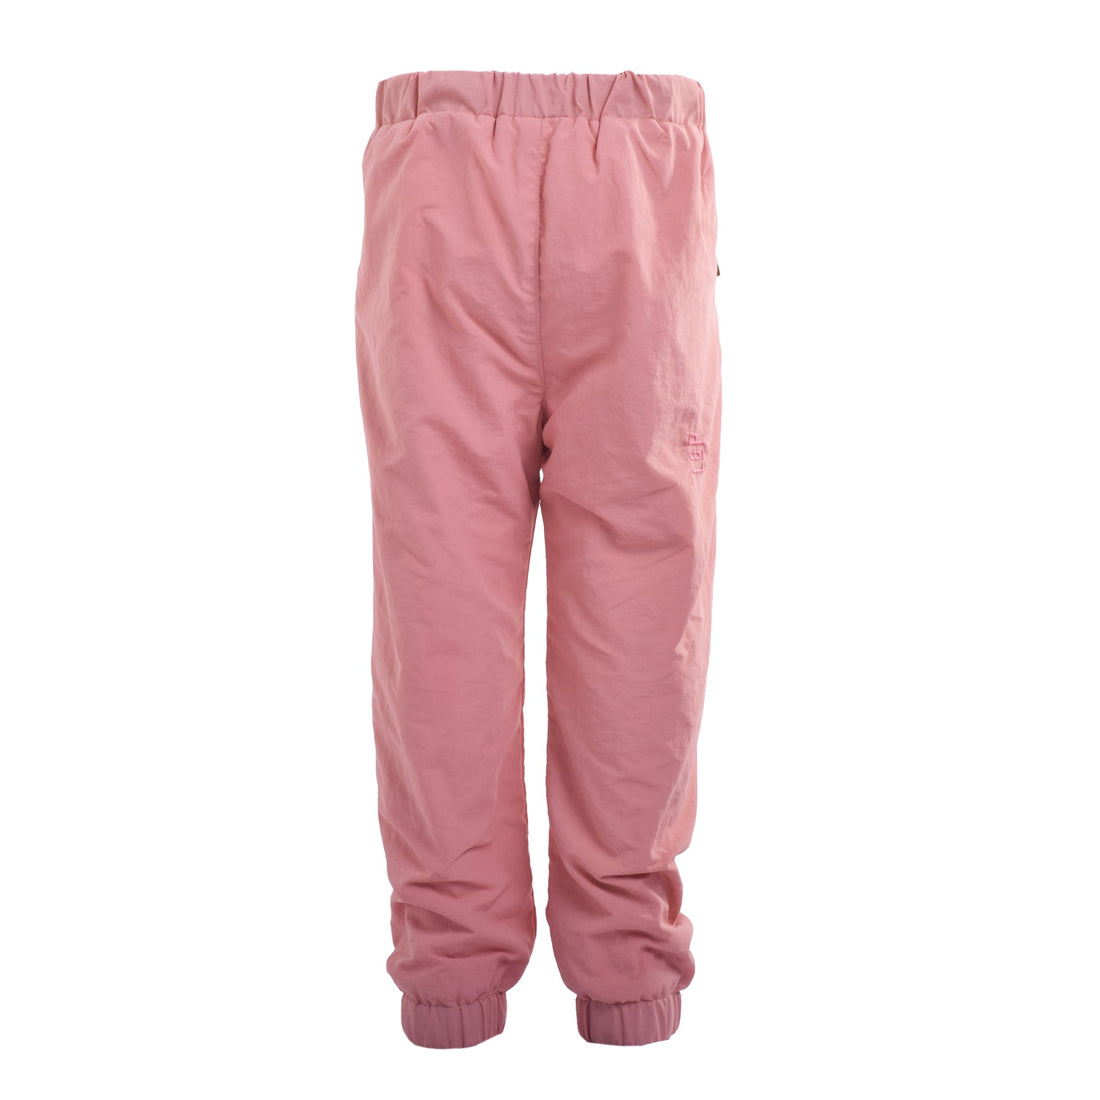 Outerwear pants, lined in polar (Indiana 2.0 + Courtenay)